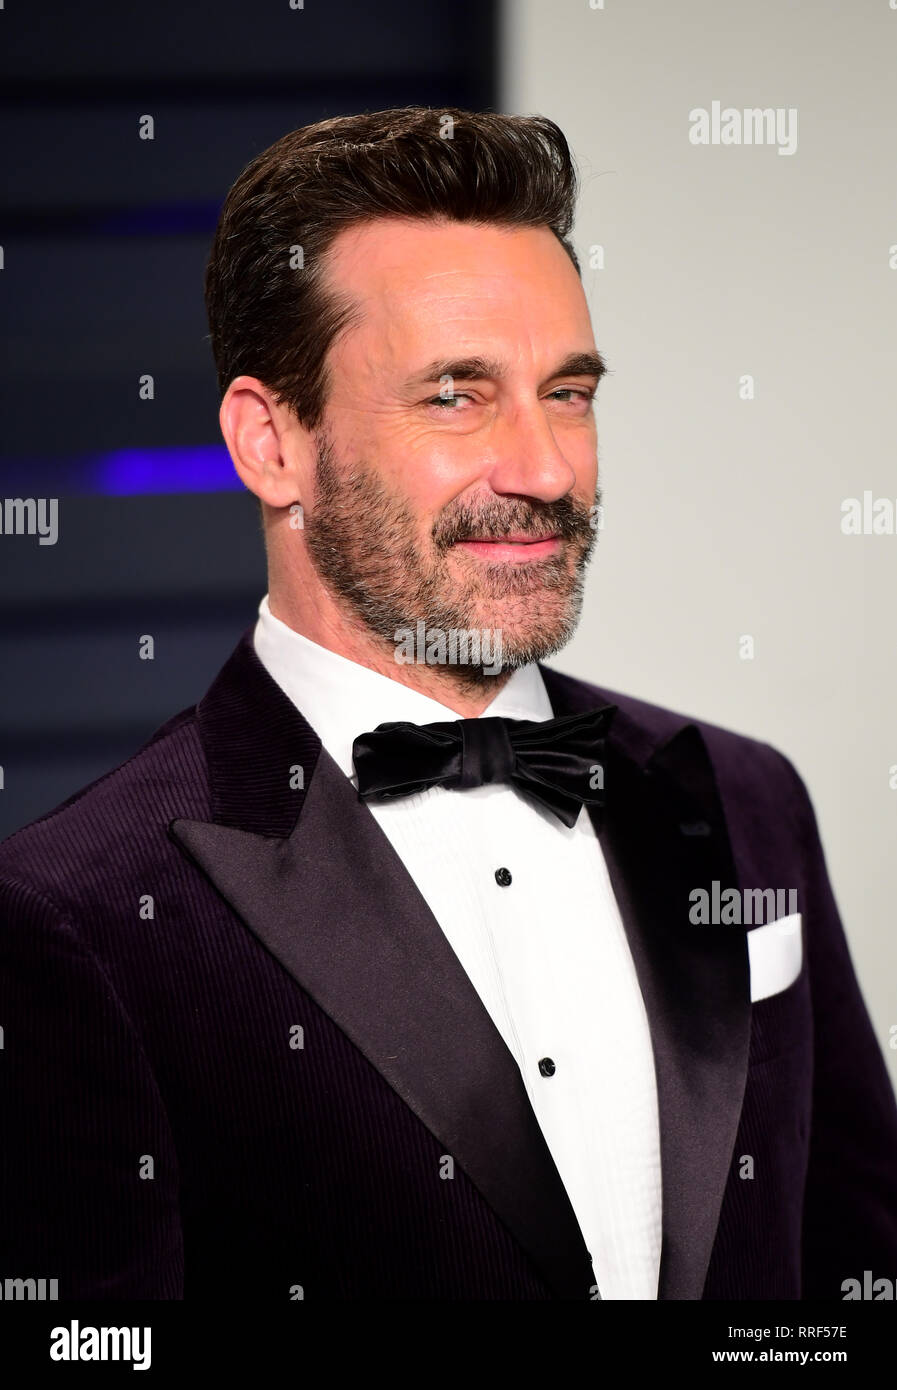 Jon Hamm attending the Vanity Fair Oscar Party held at the Wallis Annenberg Center for the Performing Arts in Beverly Hills, Los Angeles, California, USA. Stock Photo